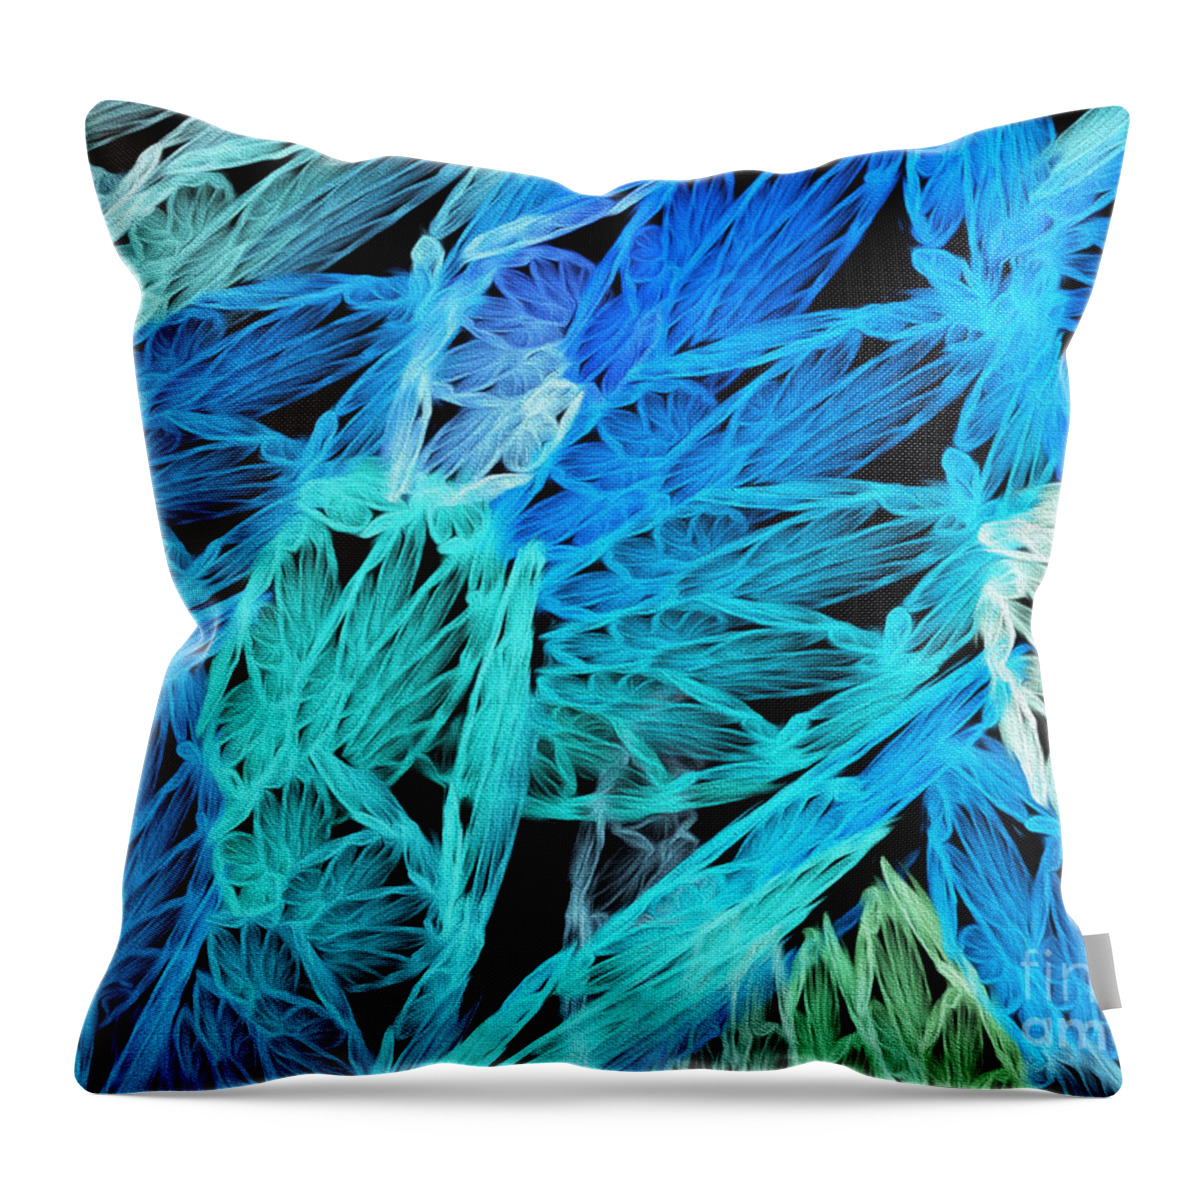 Andee Design Abstract Throw Pillow featuring the digital art Abstract In Blue by Andee Design